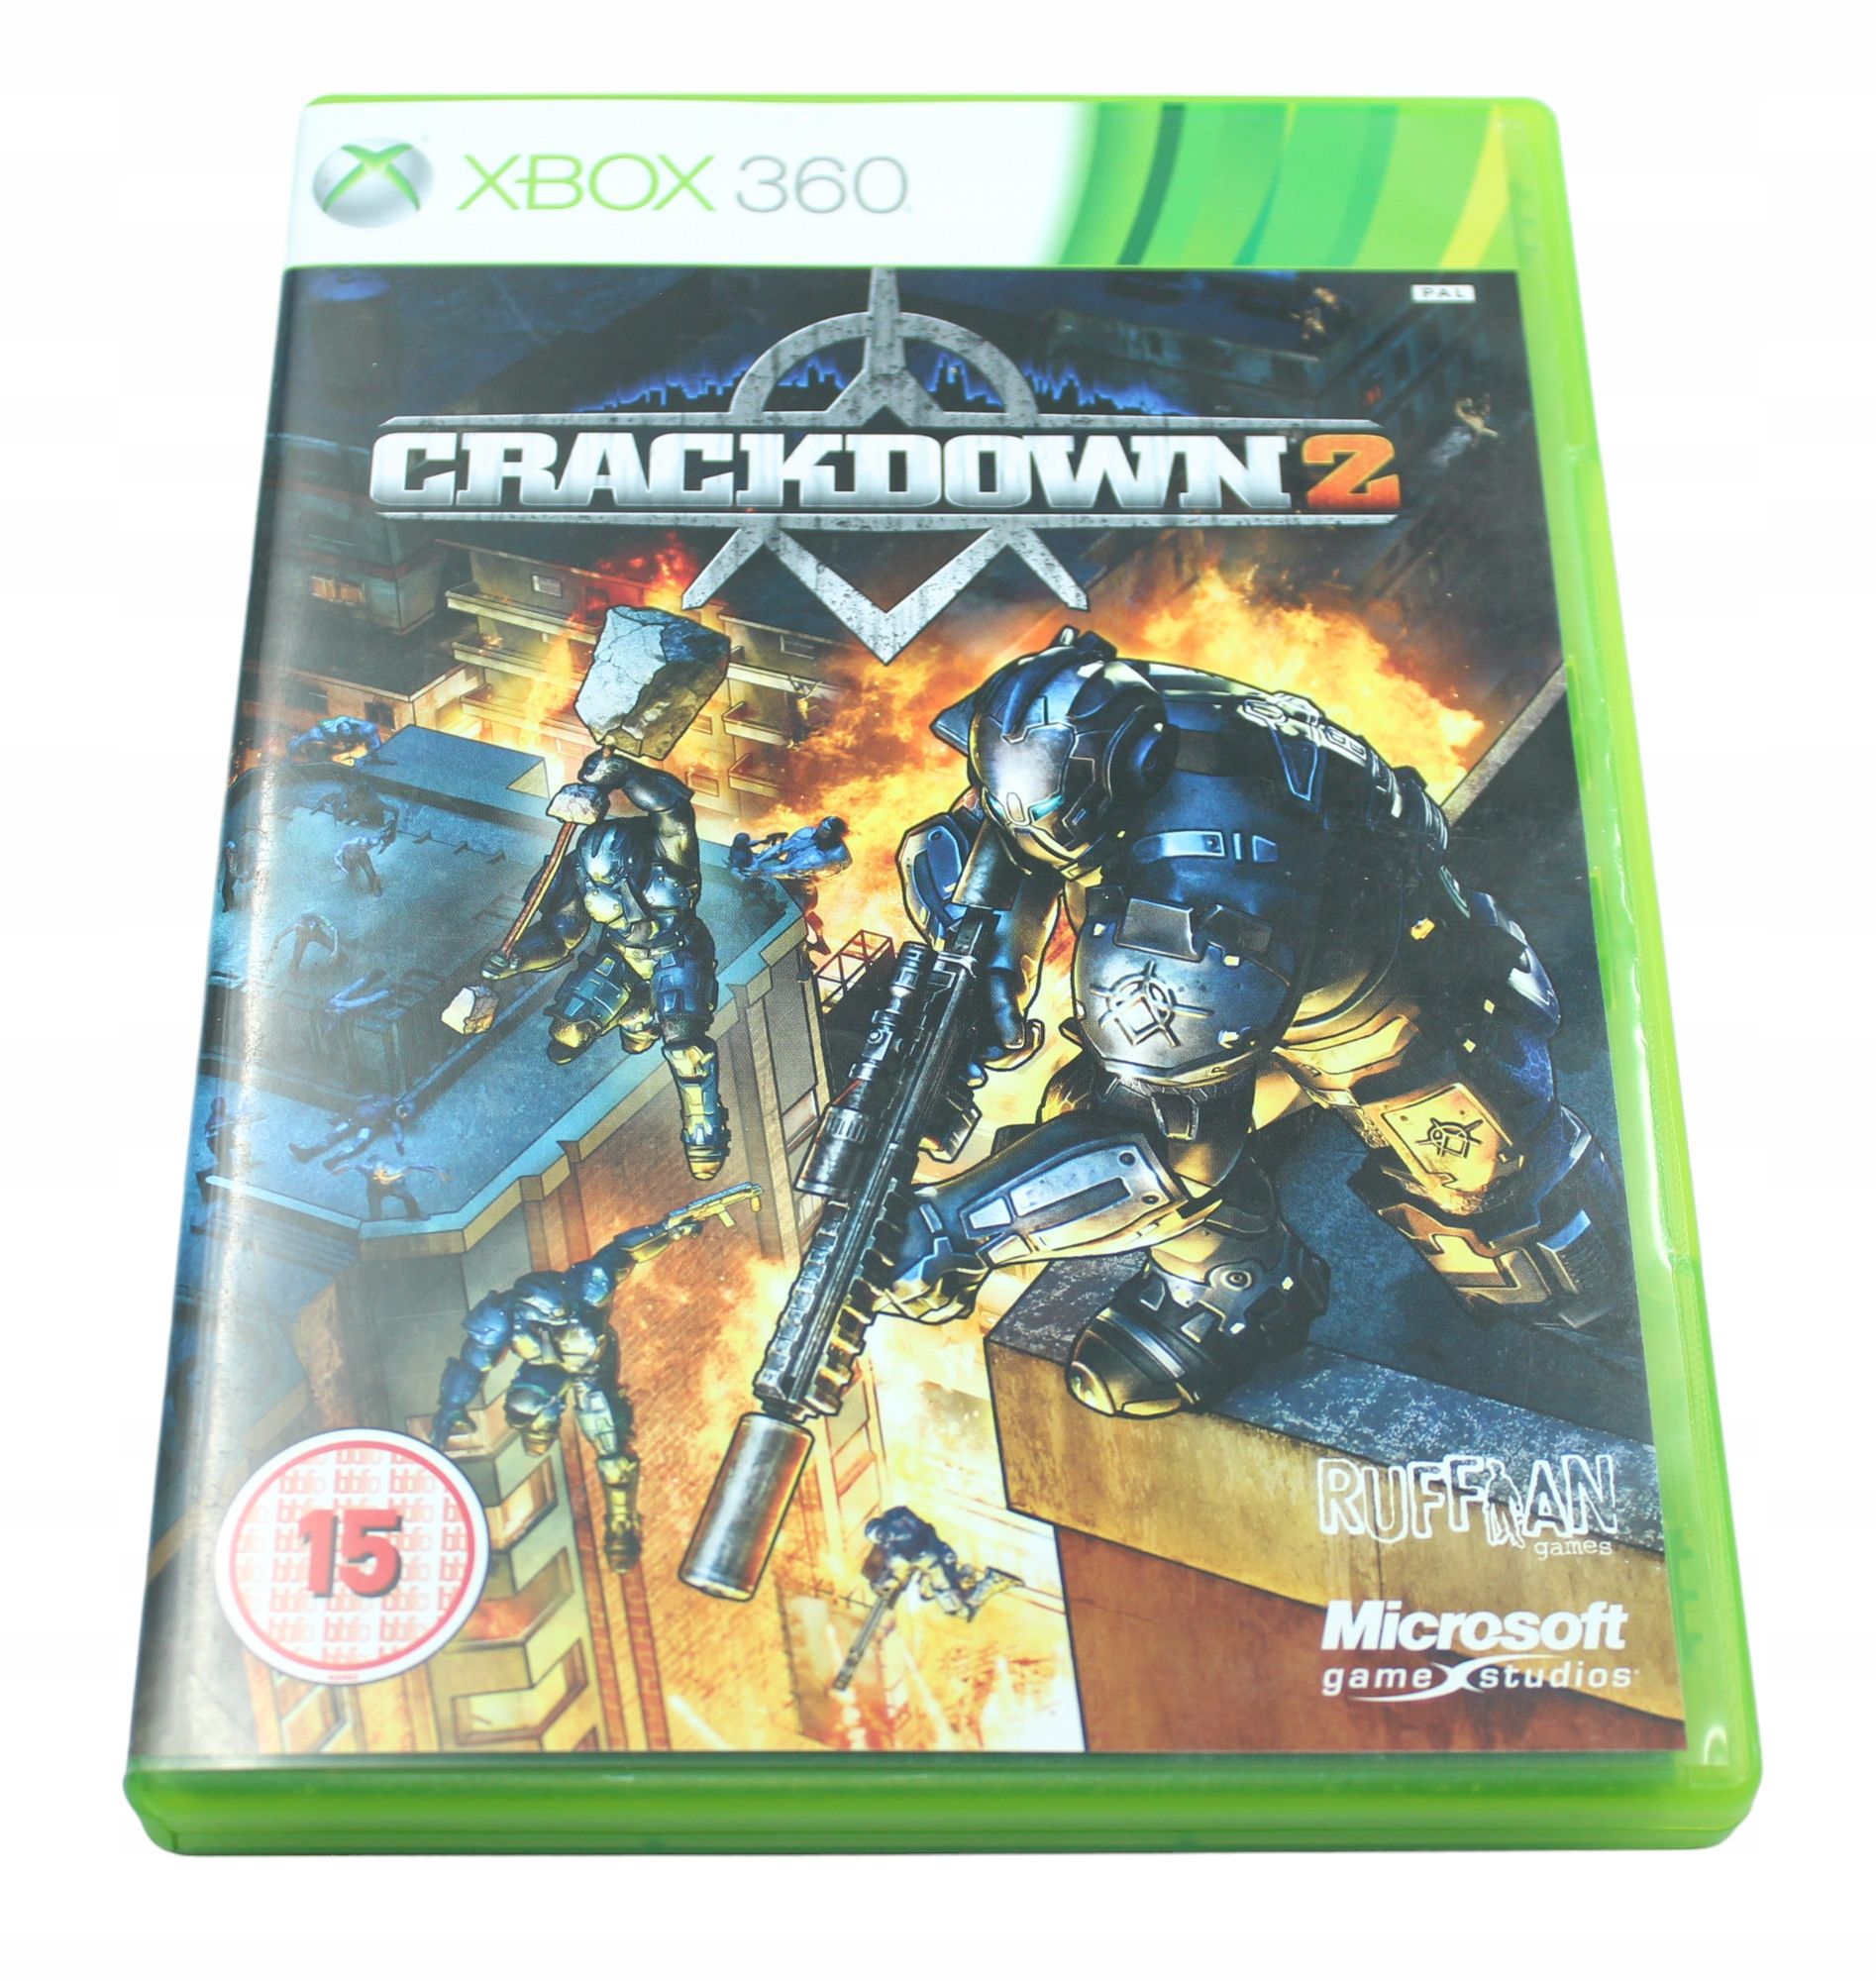 Crackdown 2 Limited Edition Animated Comics Plakat X360 Xbox 360